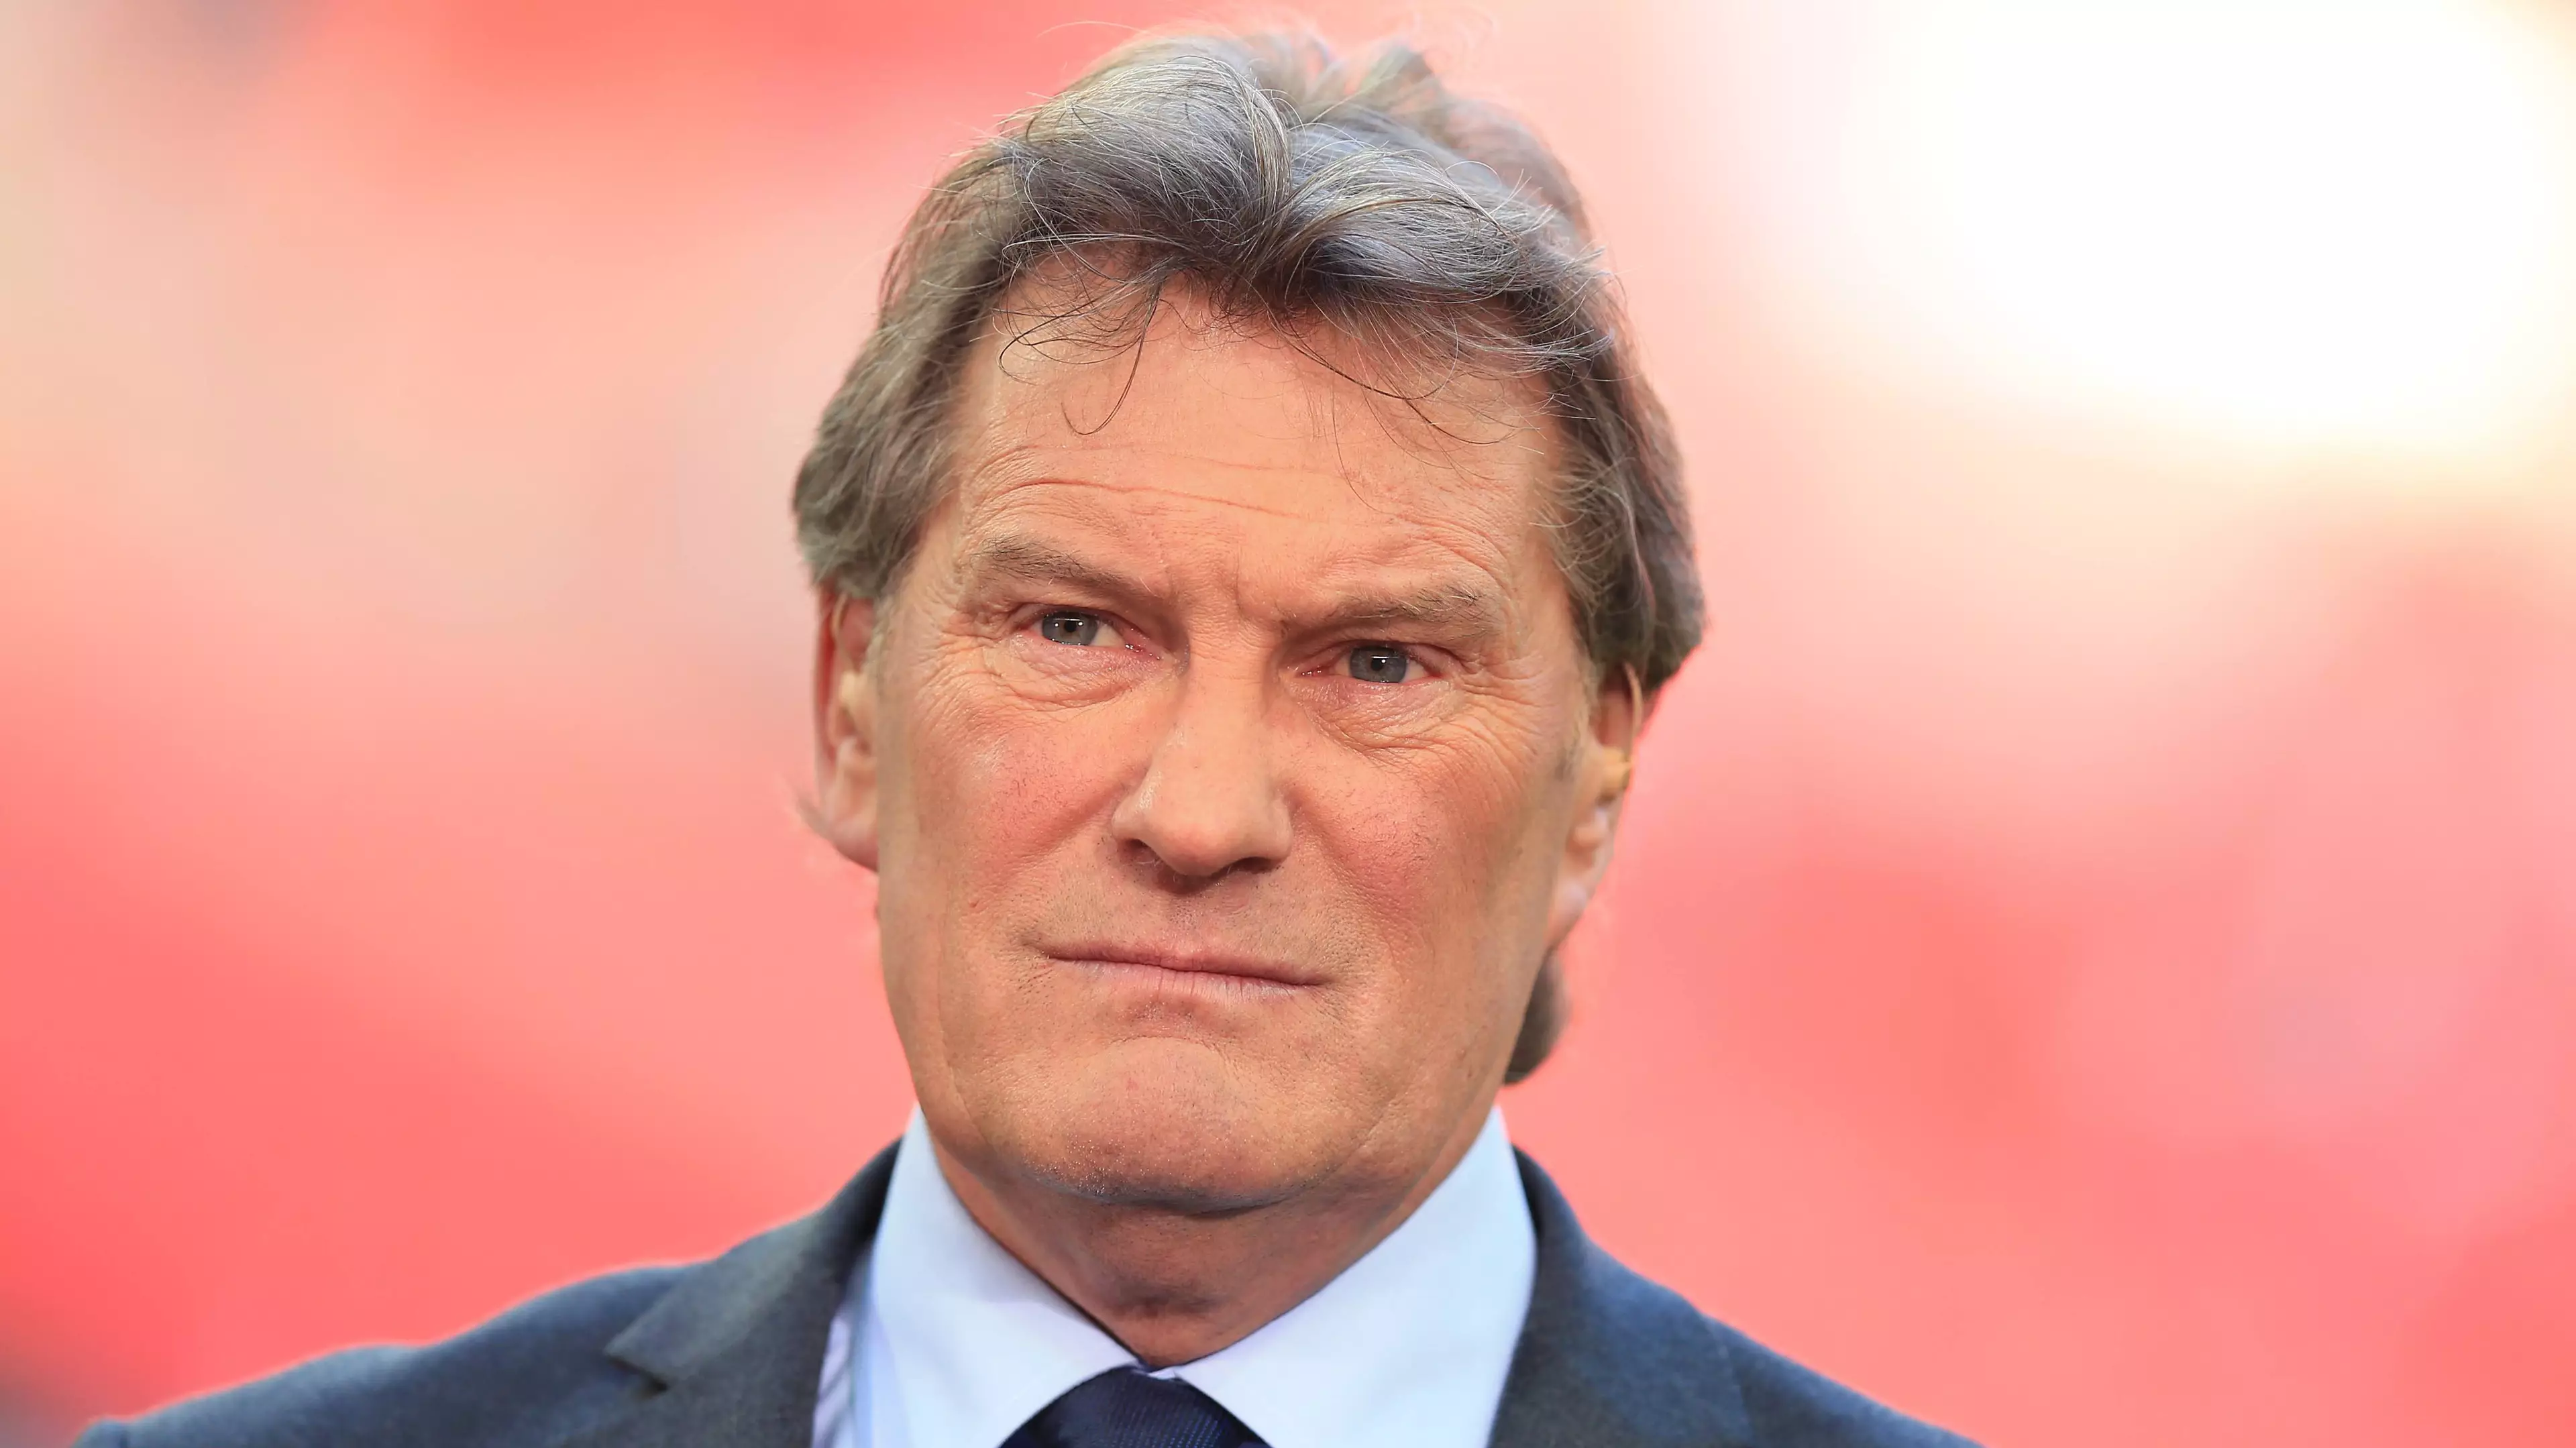 Glenn Hoddle Collapses And 'Taken Seriously Ill' At The BT Sport Studio